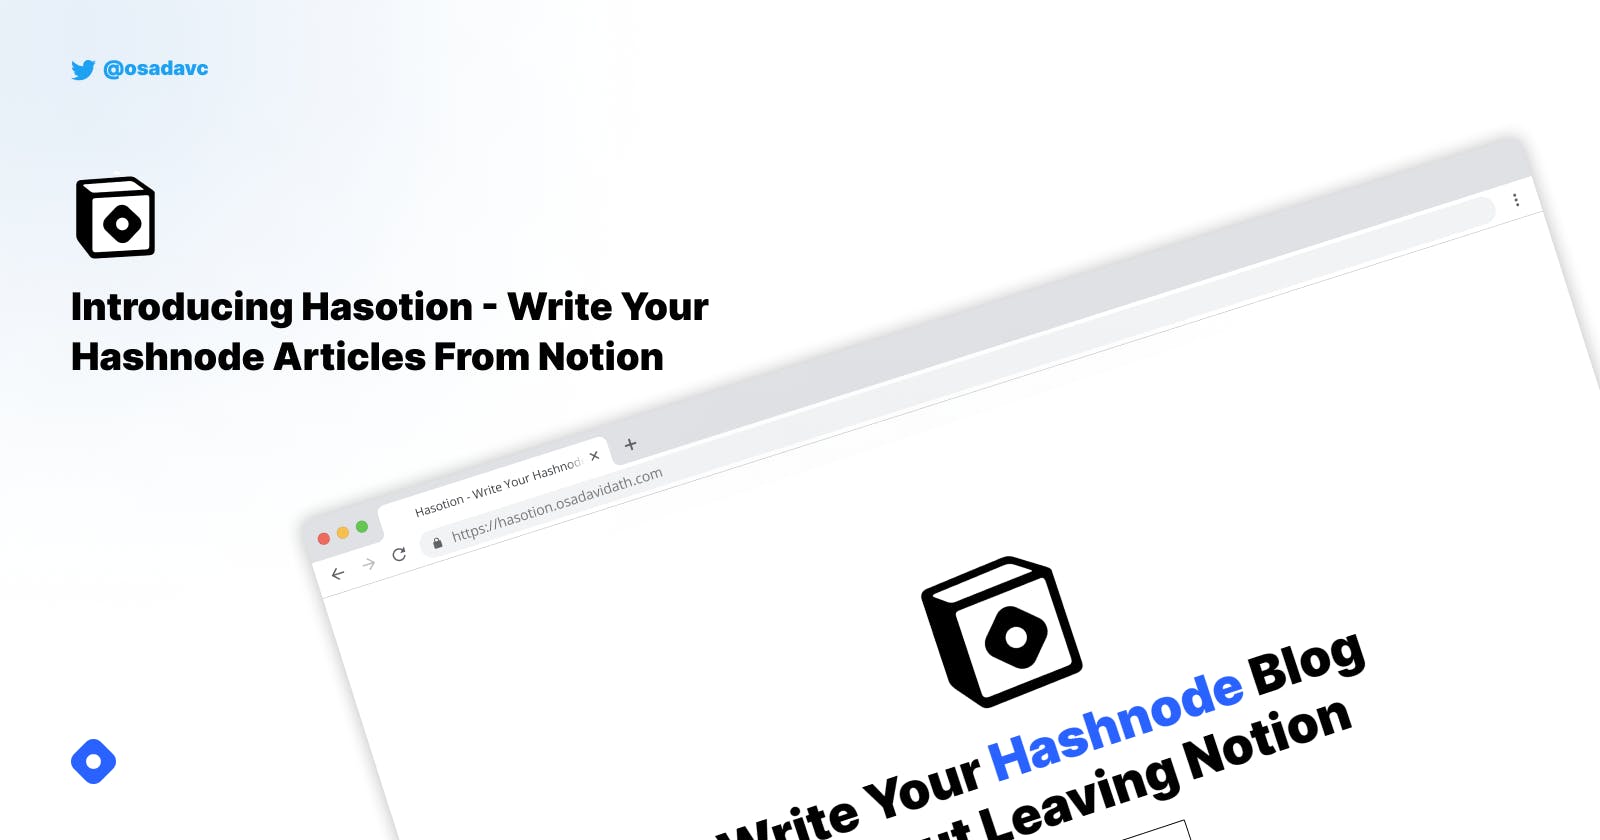 Introducing Hasotion - Write Your Hashnode Articles Without Leaving Notion